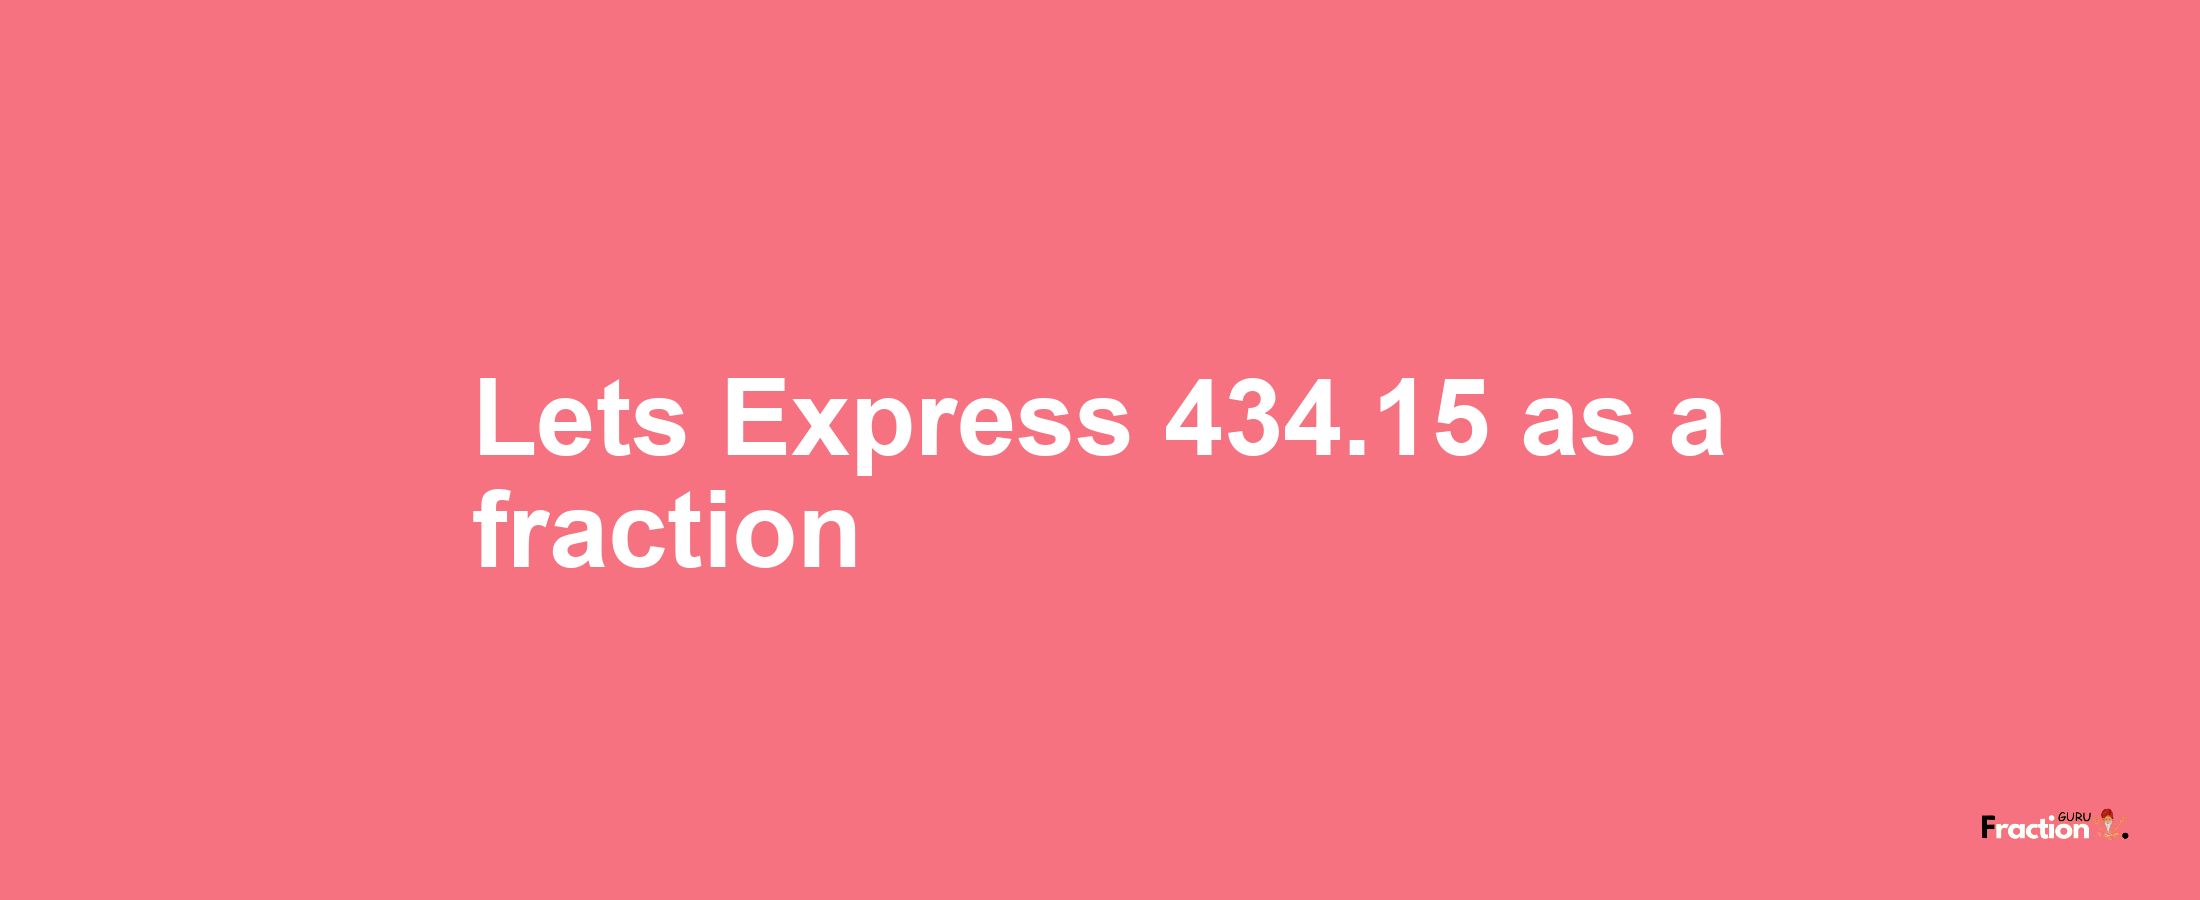 Lets Express 434.15 as afraction